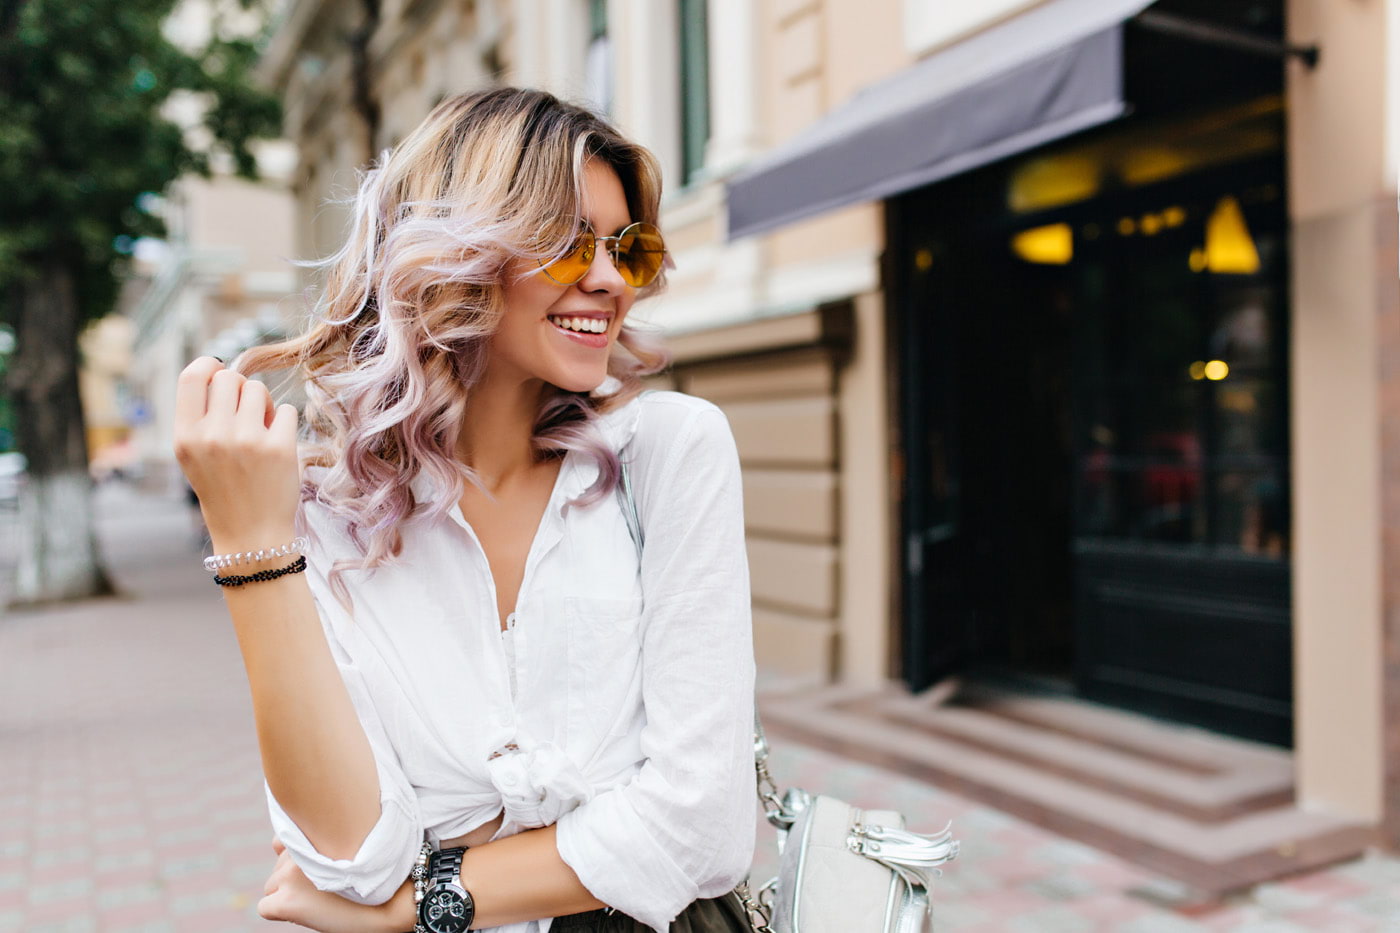 New Year, New Style? We take a look at why you want to change your look & how to make the right choice for you. Includes expert advice for hairstyle changes, hair colour changes & hair pampering treatments you'll love.